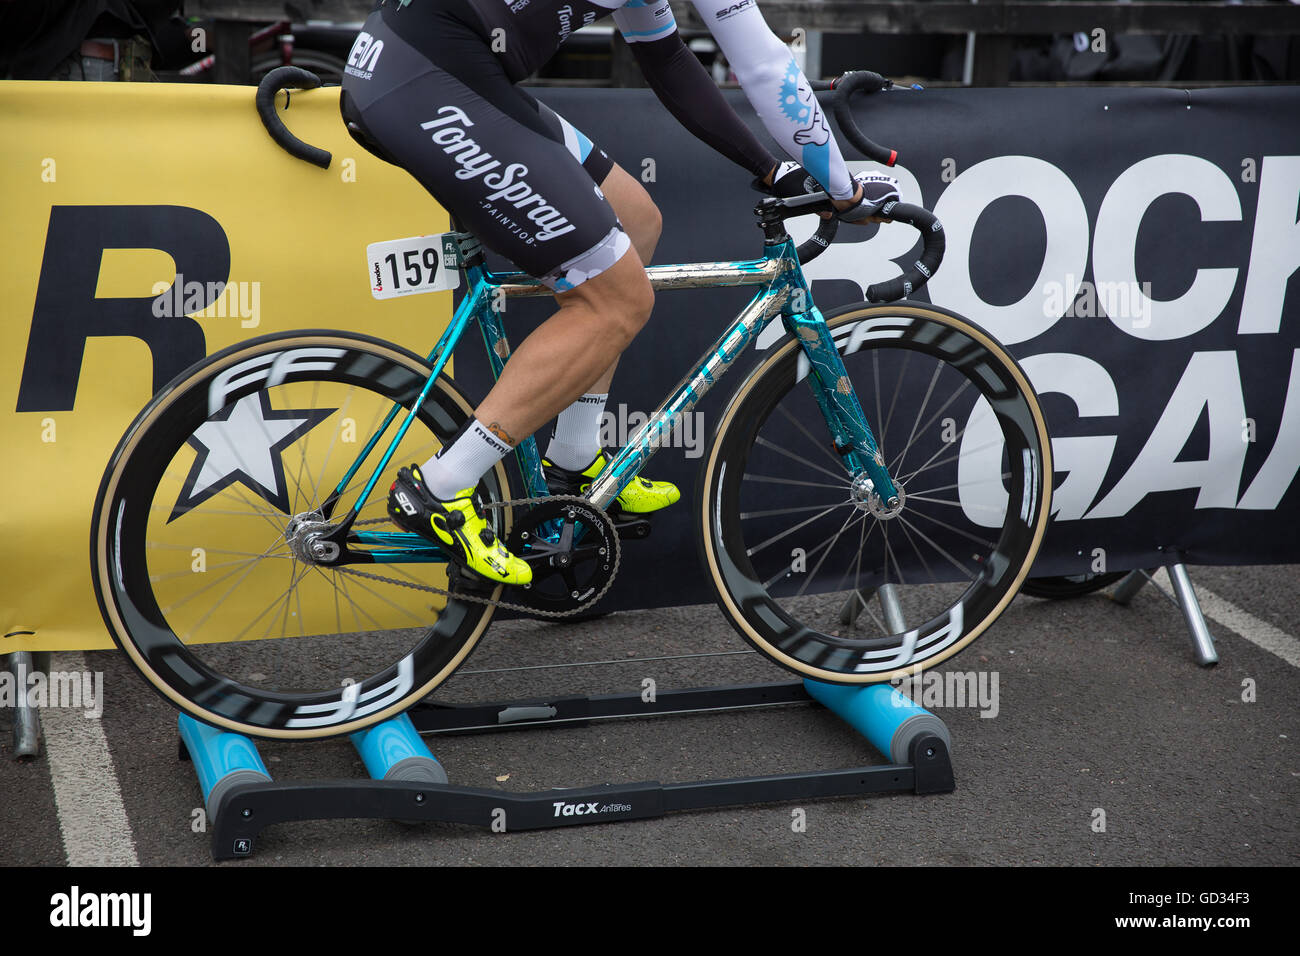 Cyclist warming up on the tacx rs prior to the Hook Criterium London 2016 Cycling Crit at Greenwich Peninsula Fixie Photo - Alamy